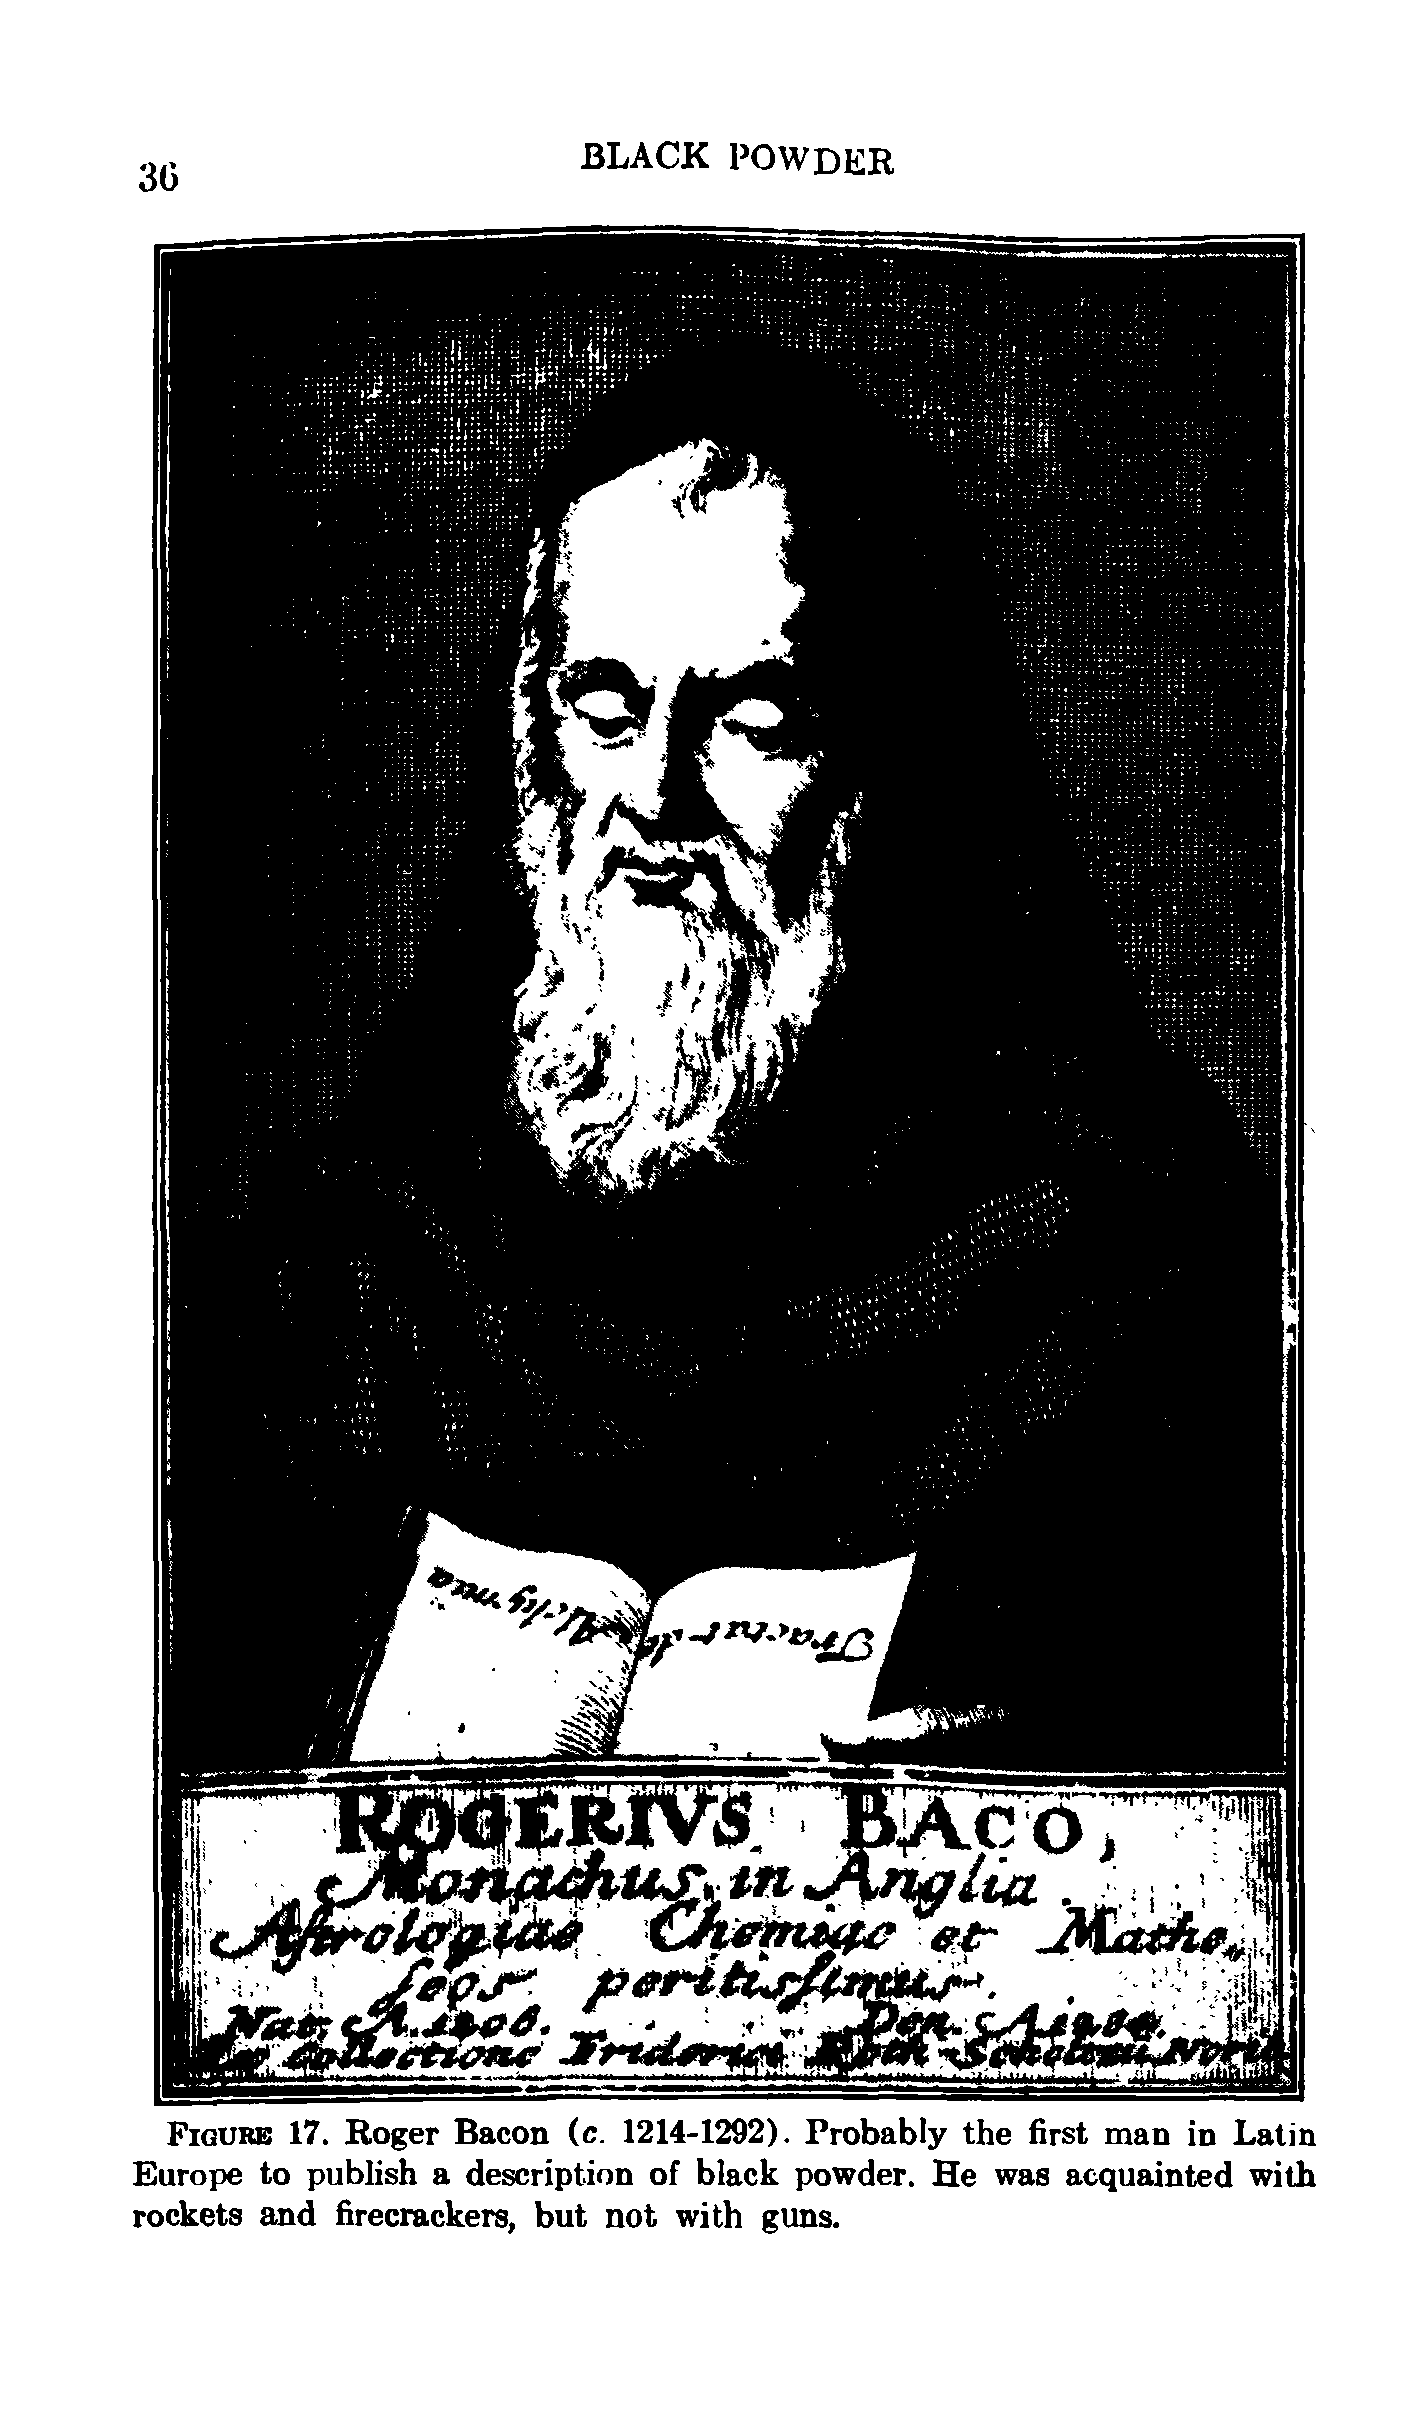 Figure 17. Roger Bacon (c. 1214-1292). Probably the first man in Latin Europe to publish a description of black powder. He was acquainted with rockets and firecrackers, but not with guns.